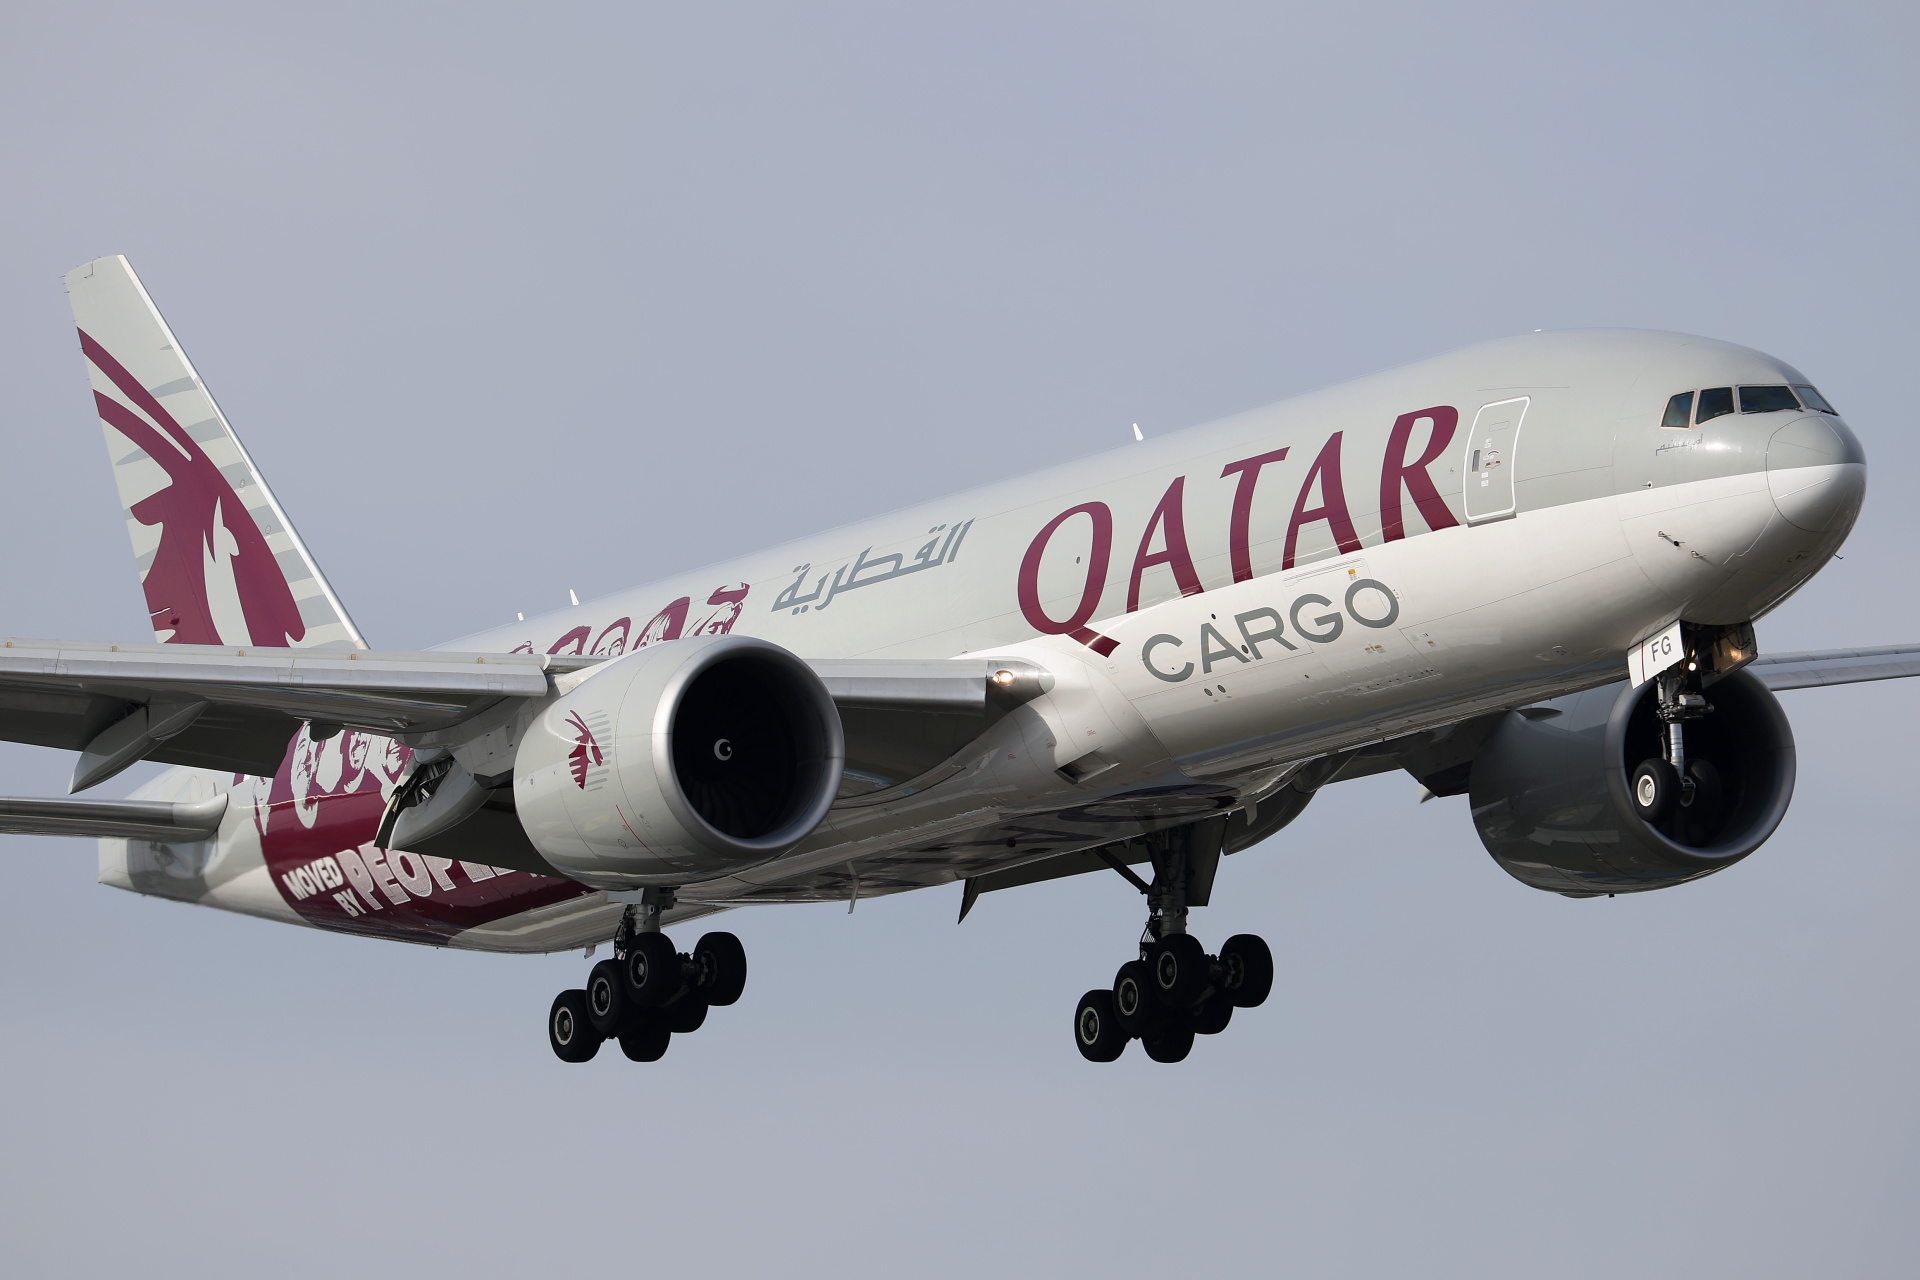 A7-BFG (Moved by People livery) (Aircraft » EPWA Spotting » Boeing 777F » Qatar Airways Cargo)